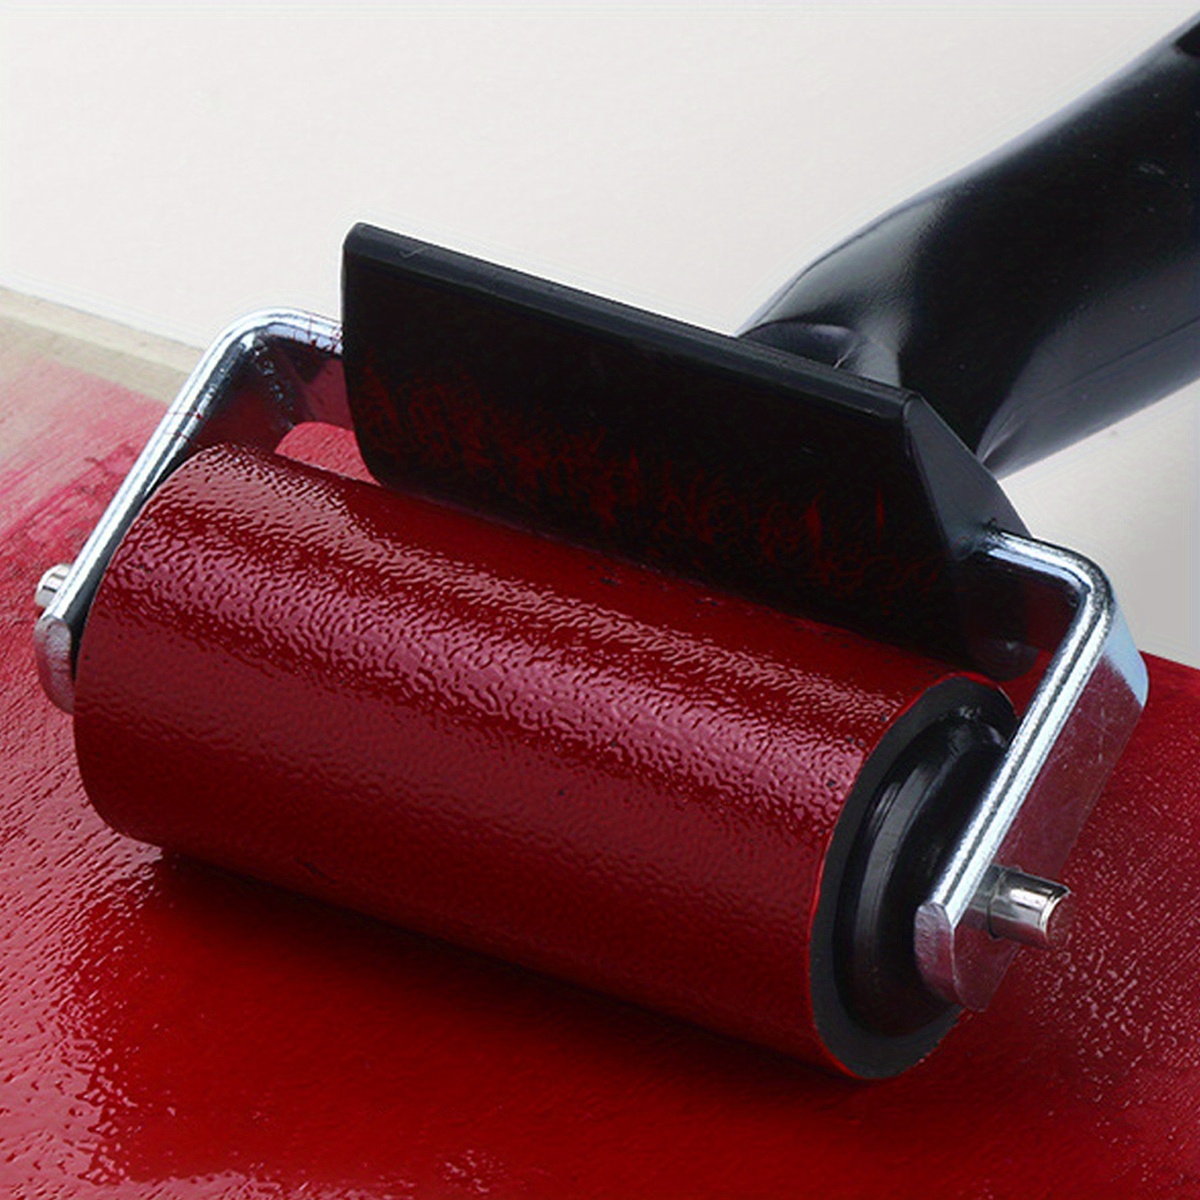 6cm Professional Rubber Roller Brayer Ink Painting Printmaking